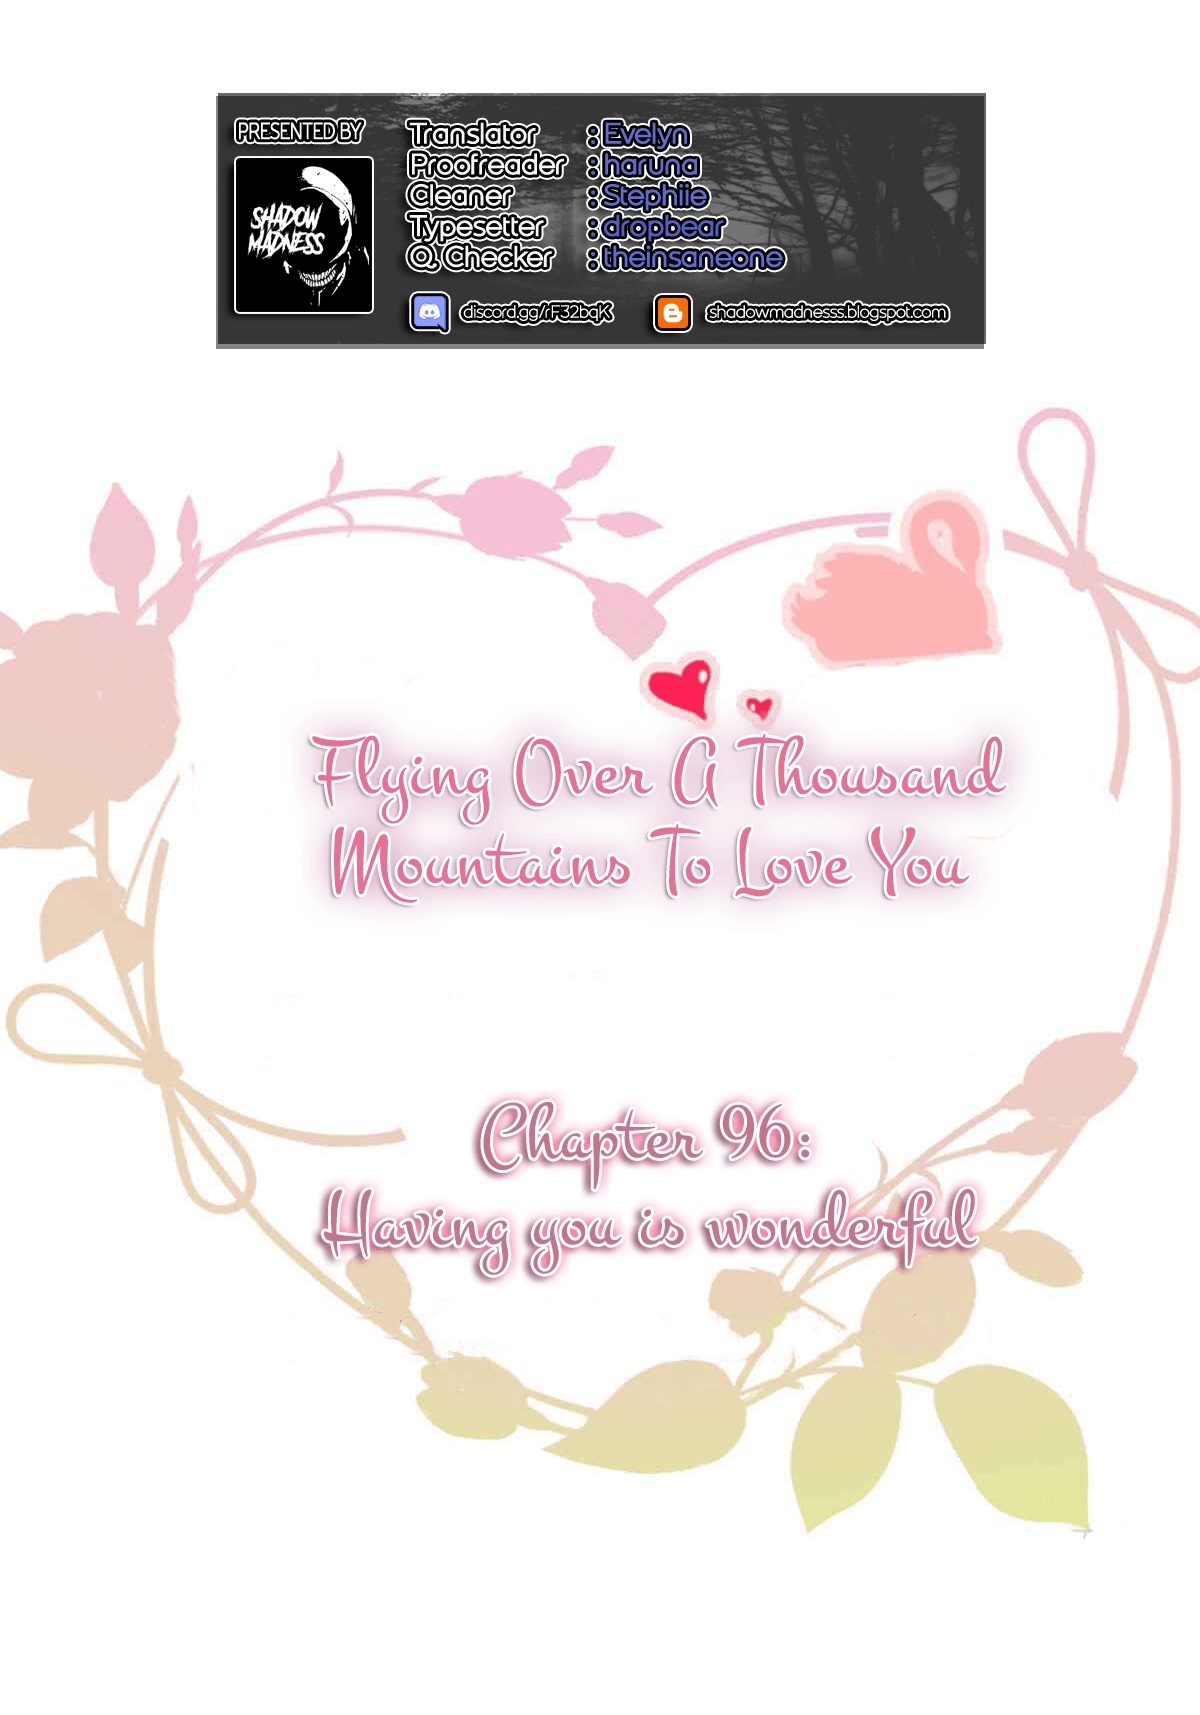 Flying Over a Thousand Mountains to Love You Ch. 96 Having you is wonderful